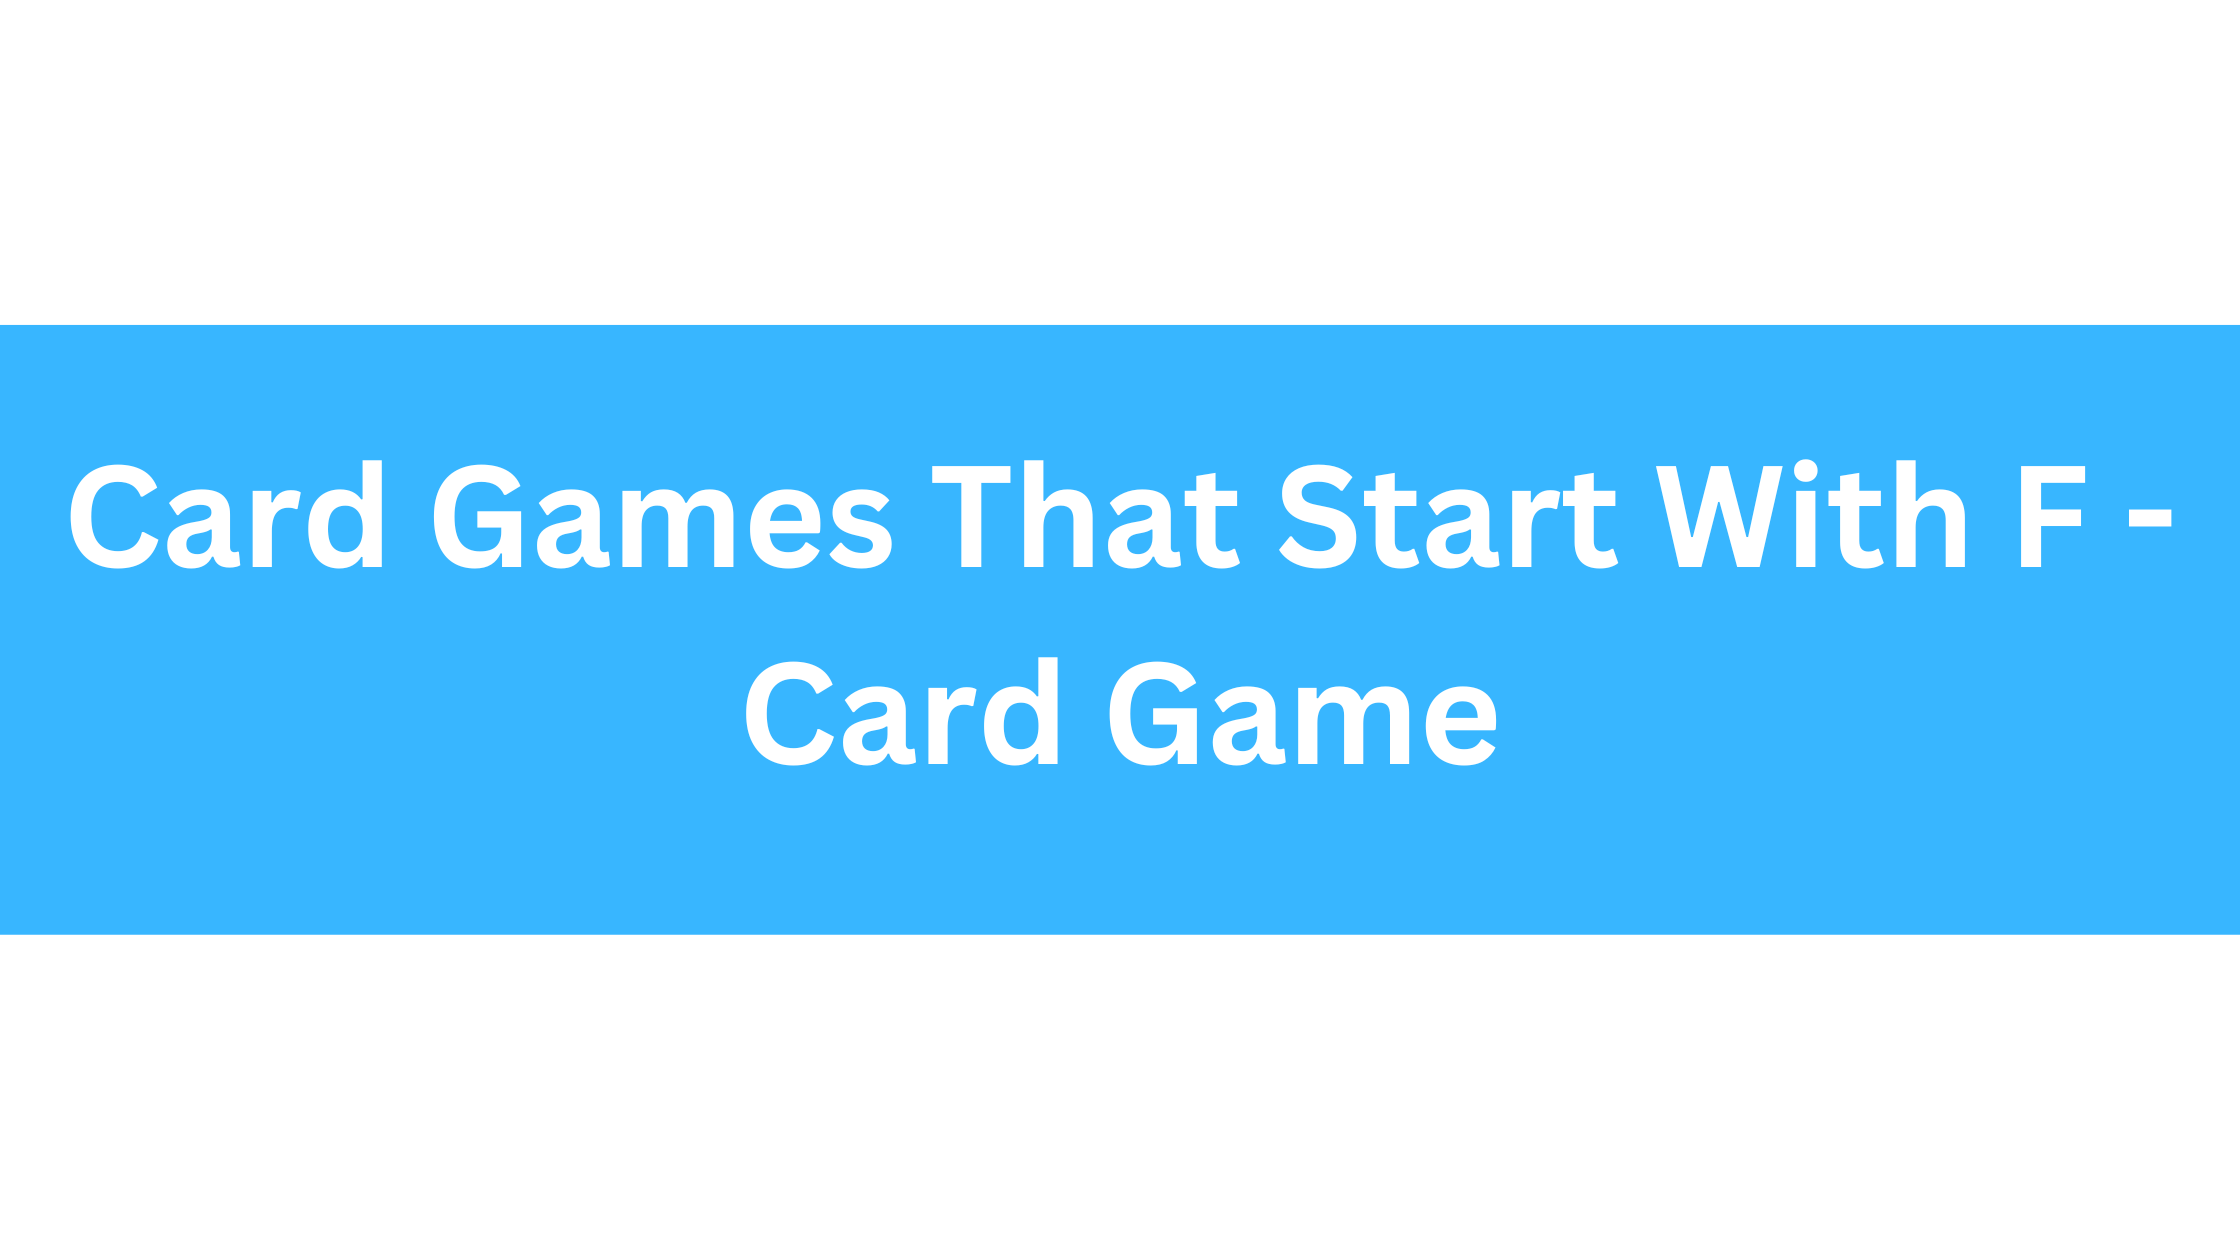 Card Games That Start With F